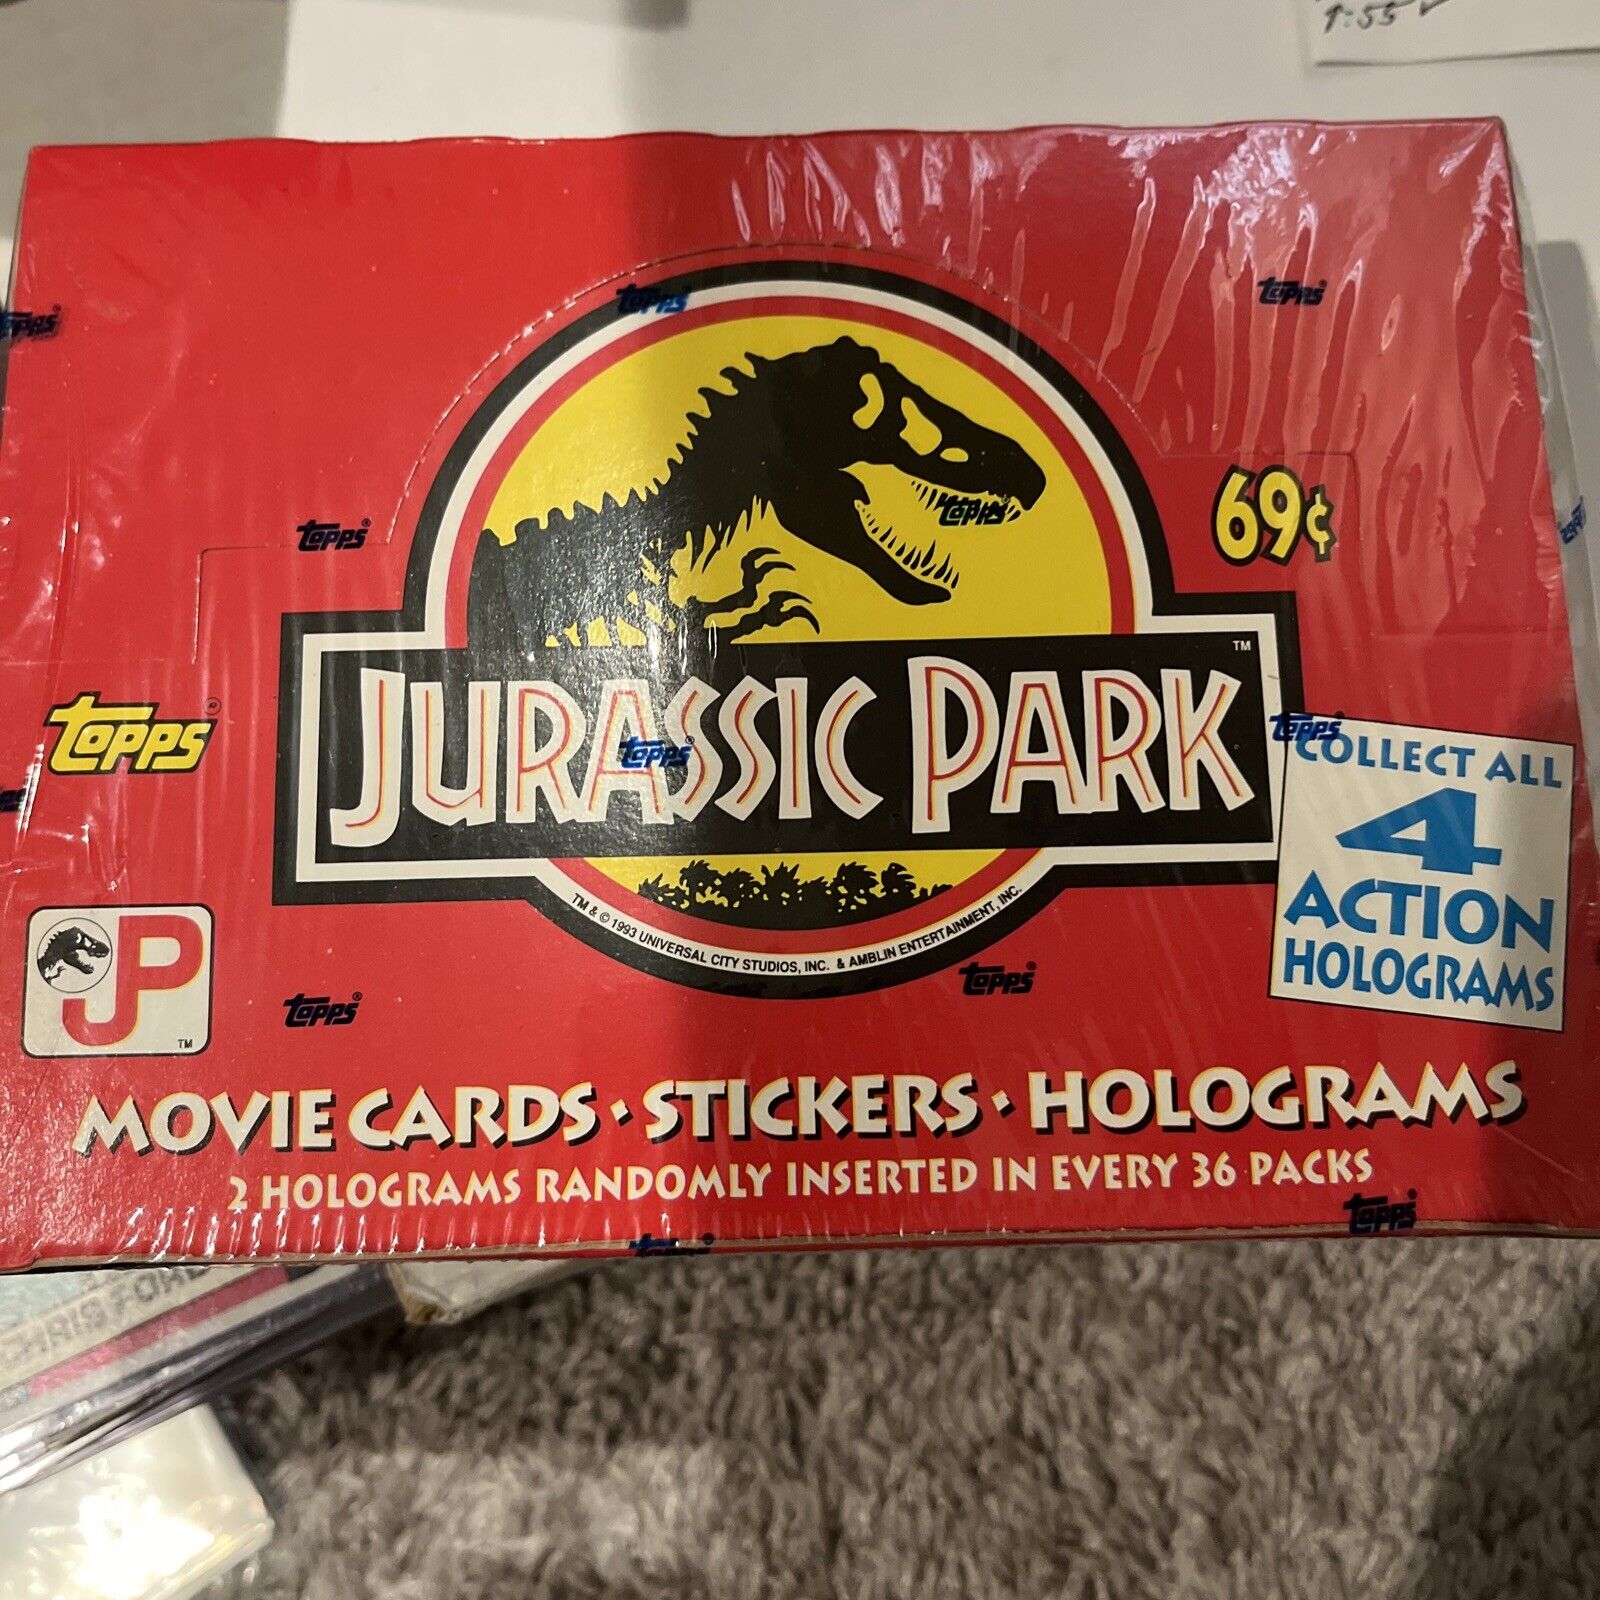 1992 TOPPS JURASSIC PARK FACTORY SEALED WAX PACK BOX 36ct Very Clean Box 🔥🔥